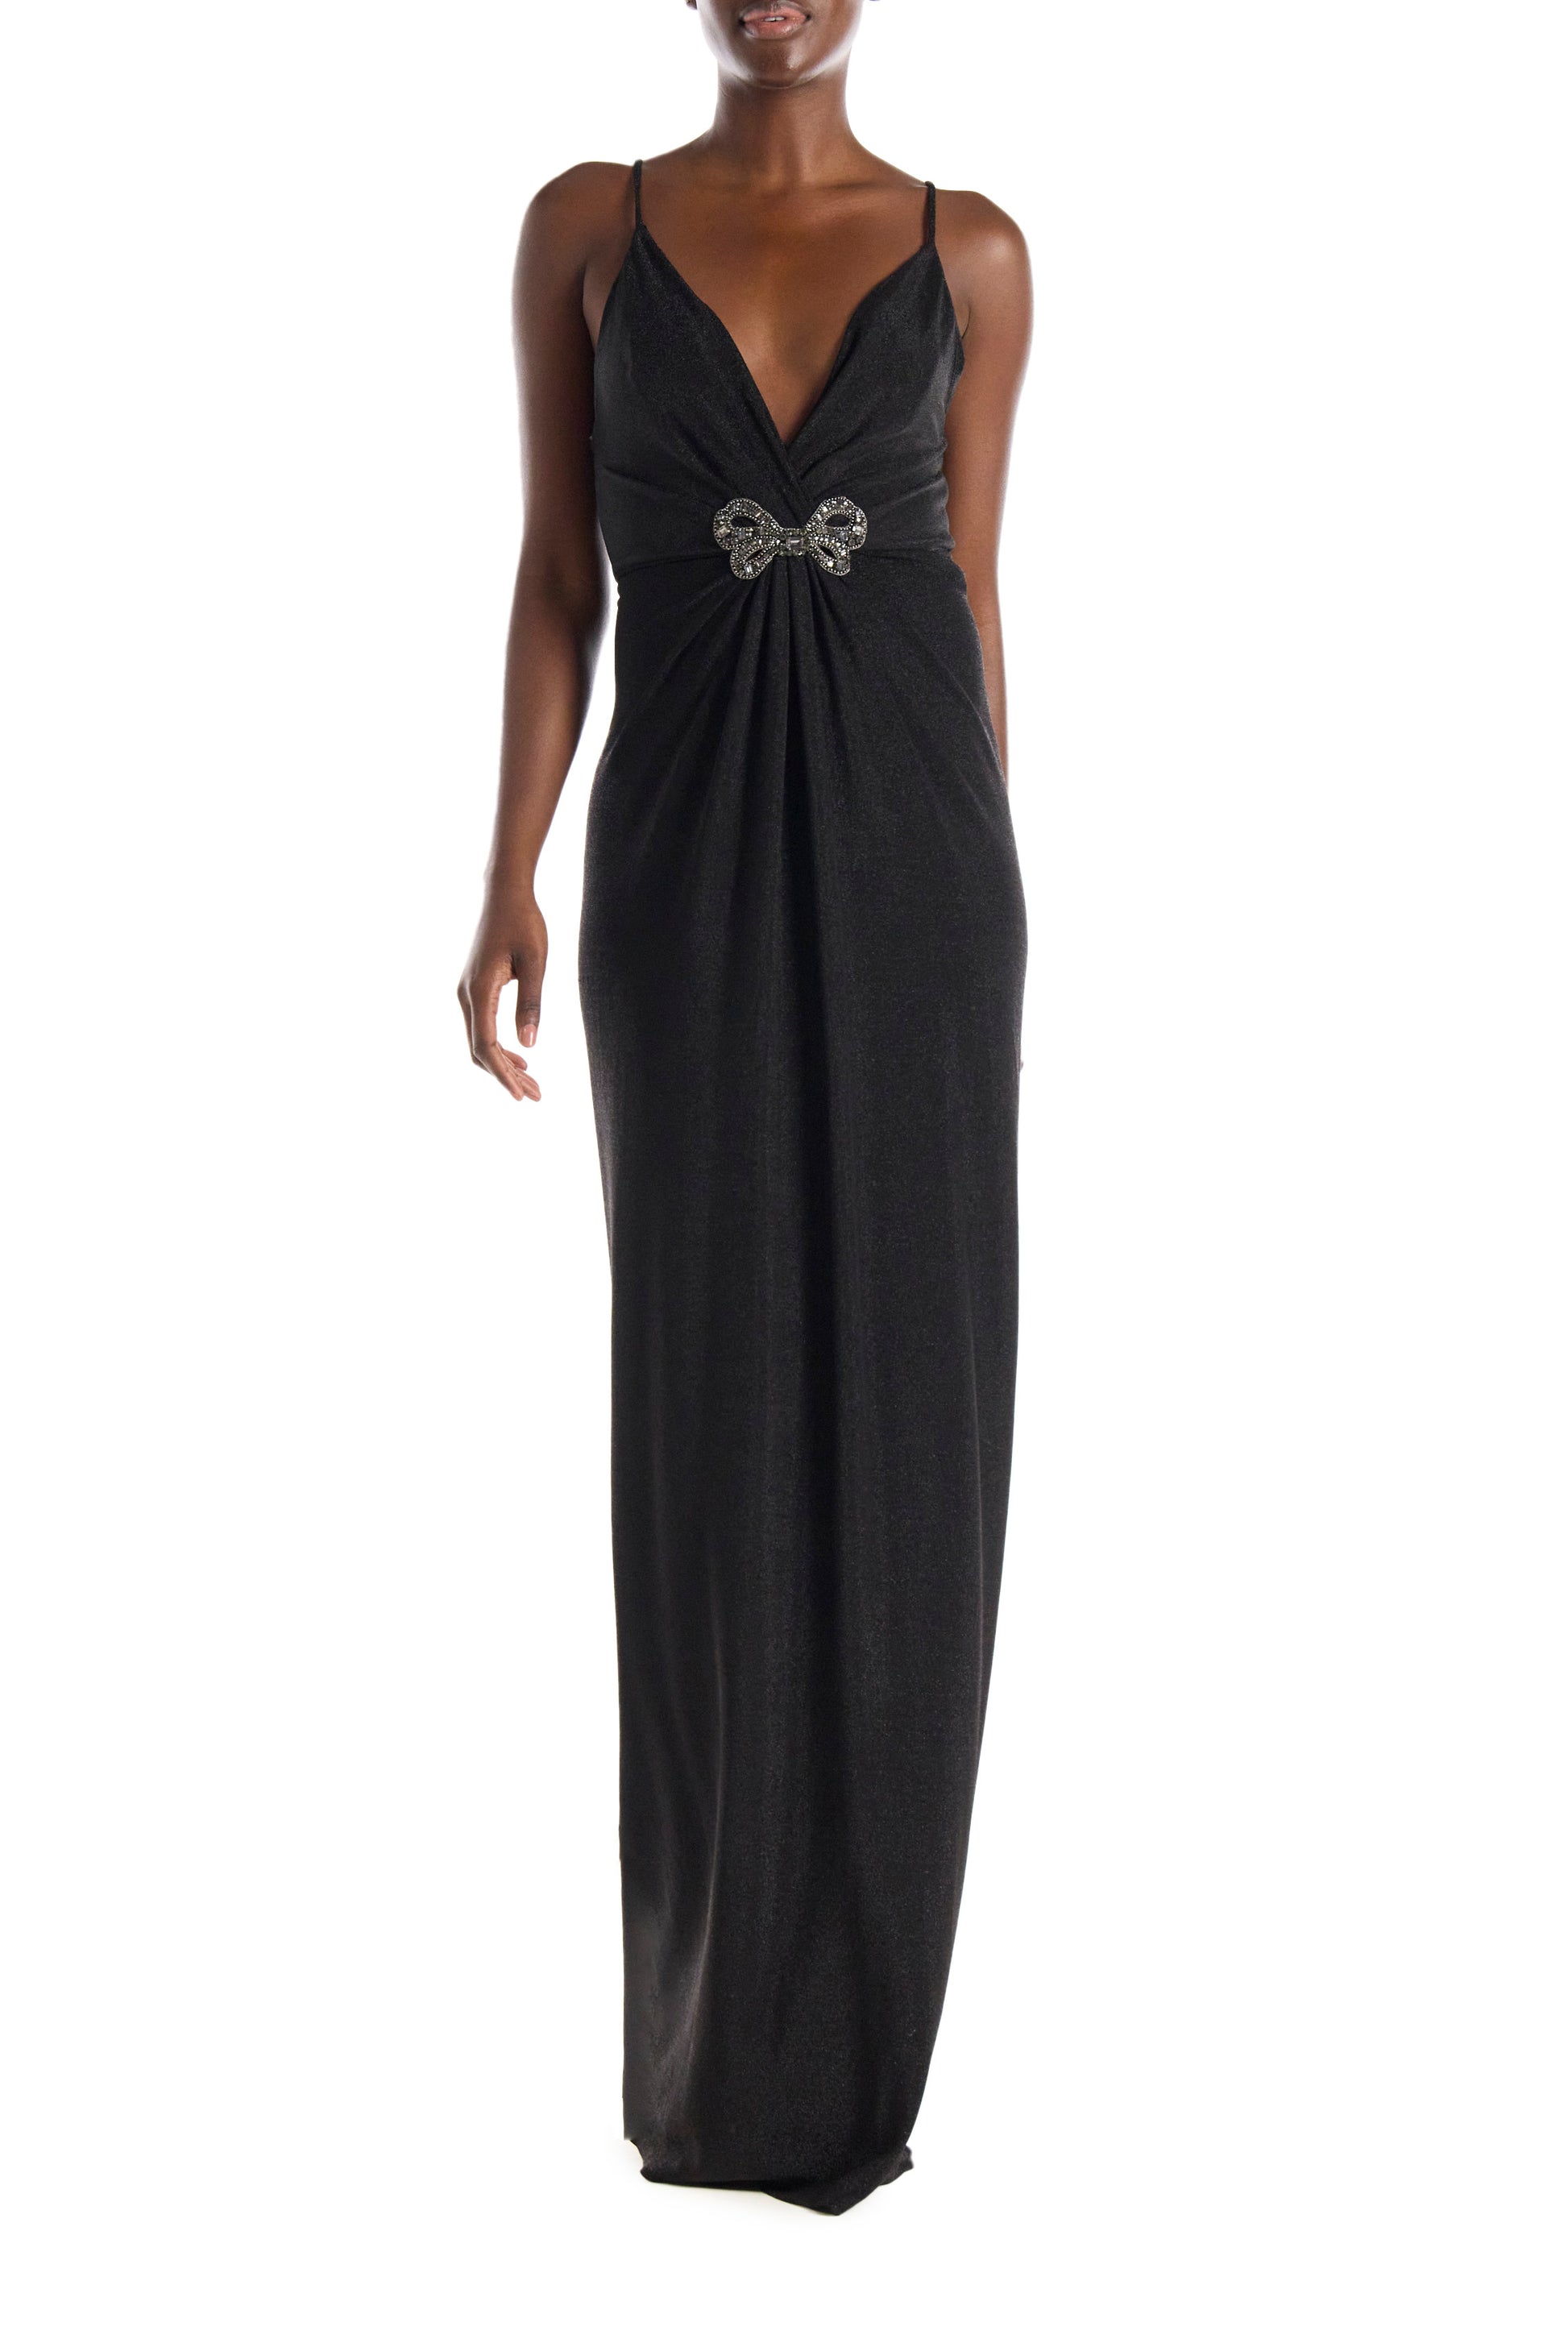 Monique Lhuillier black glitter knit gown with deep v neck, spaghetti straps and embroidered bow detail at bodice.